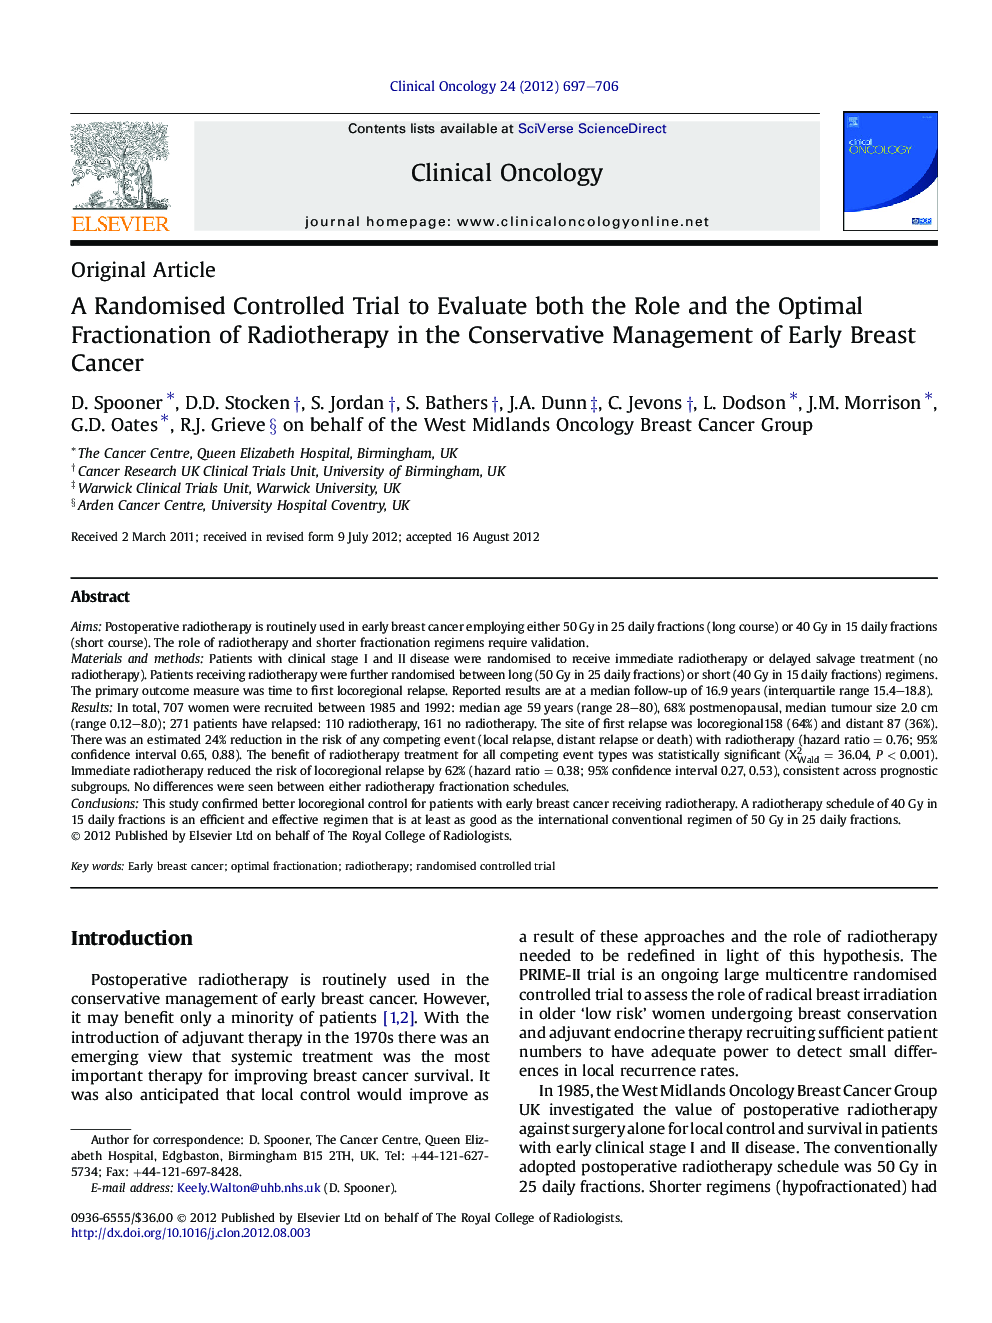 A Randomised Controlled Trial to Evaluate both the Role and the Optimal Fractionation of Radiotherapy in the Conservative Management of Early Breast Cancer